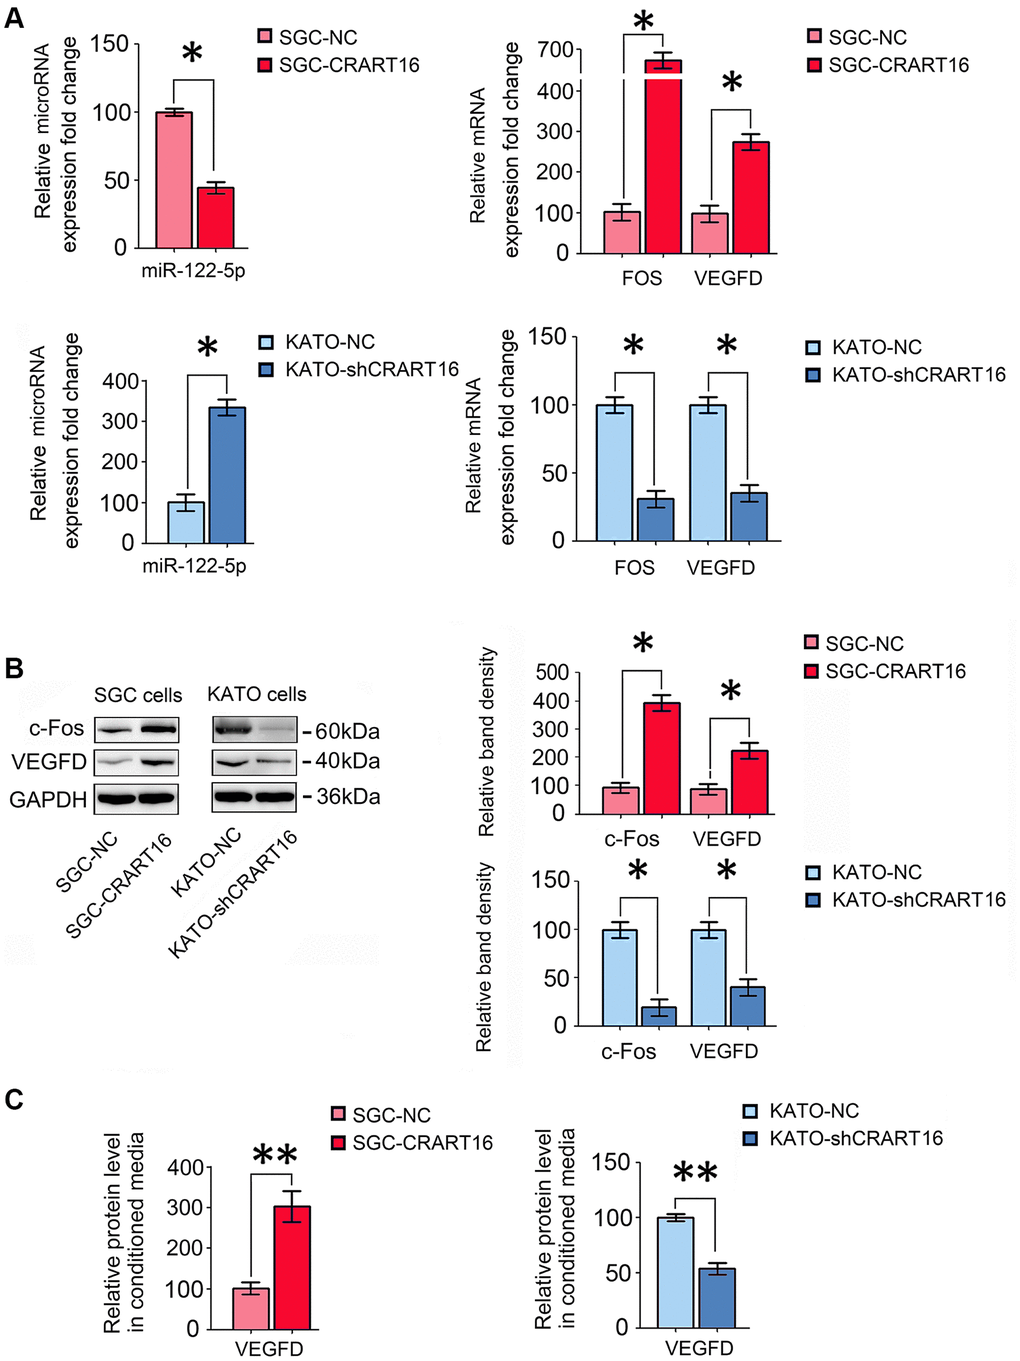 CRART16 overexpression increases c-Fos and VEGFD expression by targeting miR-122-5p. (A) The relative levels of miR-122-5p and mRNAs encoding FOS and VEGFD in different gastric cancer cell lines were analyzed by qRT-PCR (*P B) The relative levels of c-Fos and VEGFD in different gastric cancer cell lines were determined by western blotting. GAPDH was used as a loading control (*P C) The expression levels of VEGFD in conditioned media from different types of gastric cancer cells were determined by ELISA (**P 